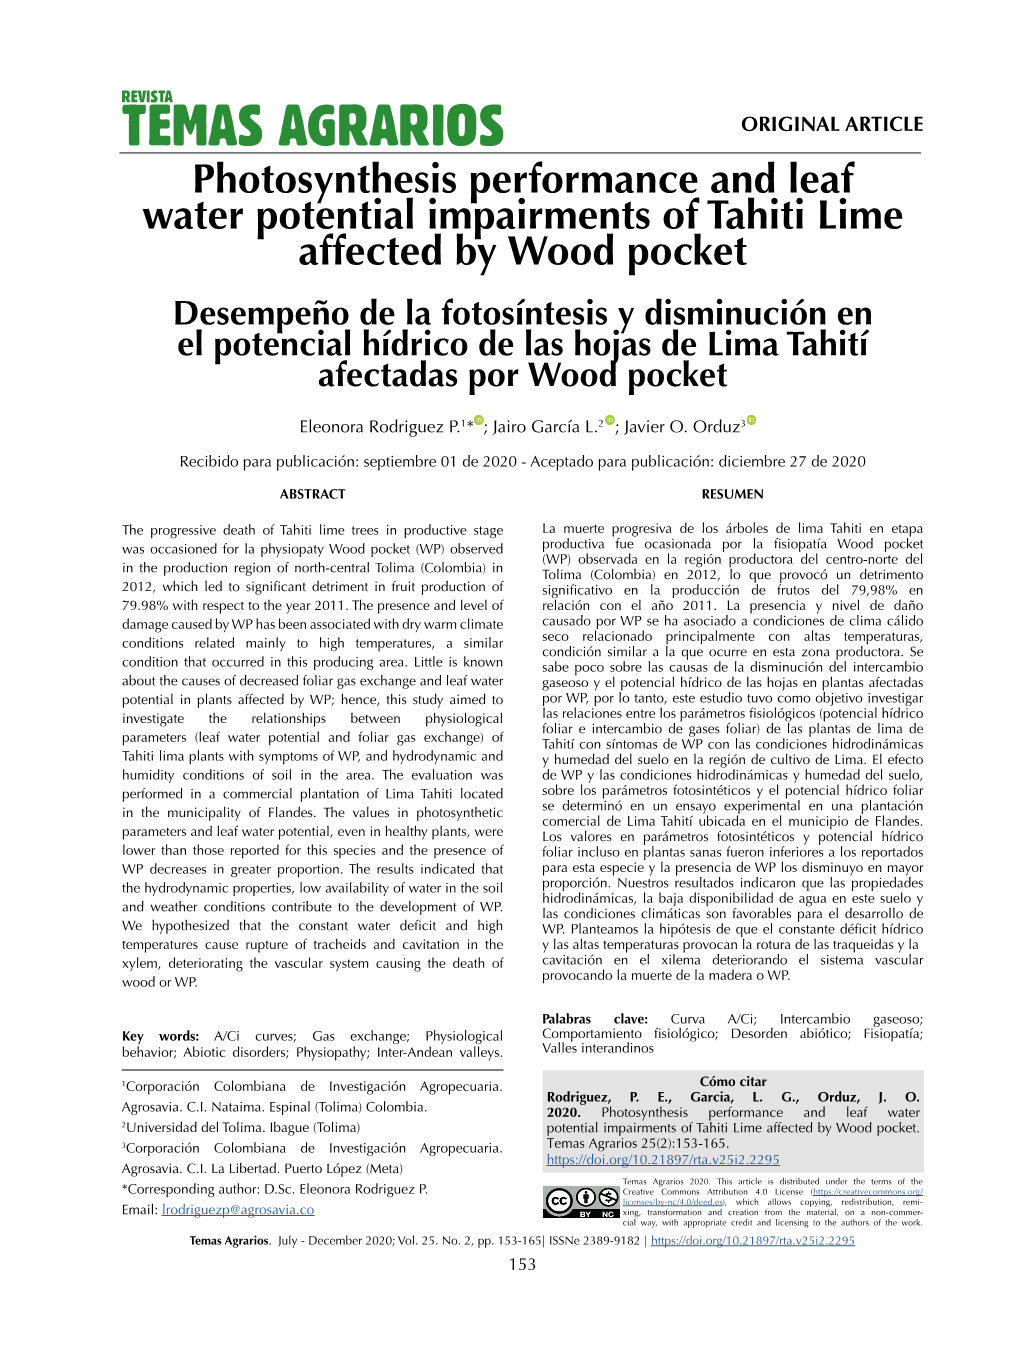 Photosynthesis Performance and Leaf Water Potential Impairments Of